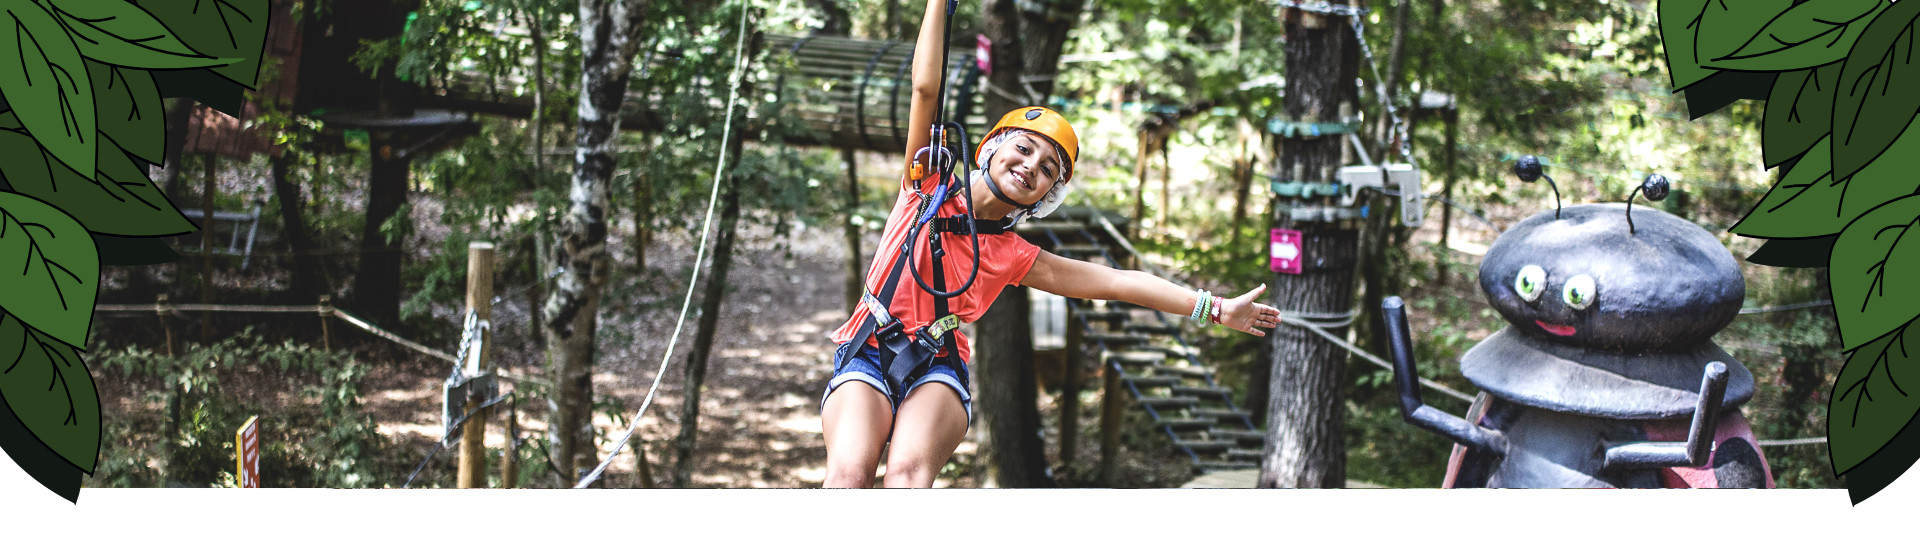 Young girl on a zip line with her arms outstretched